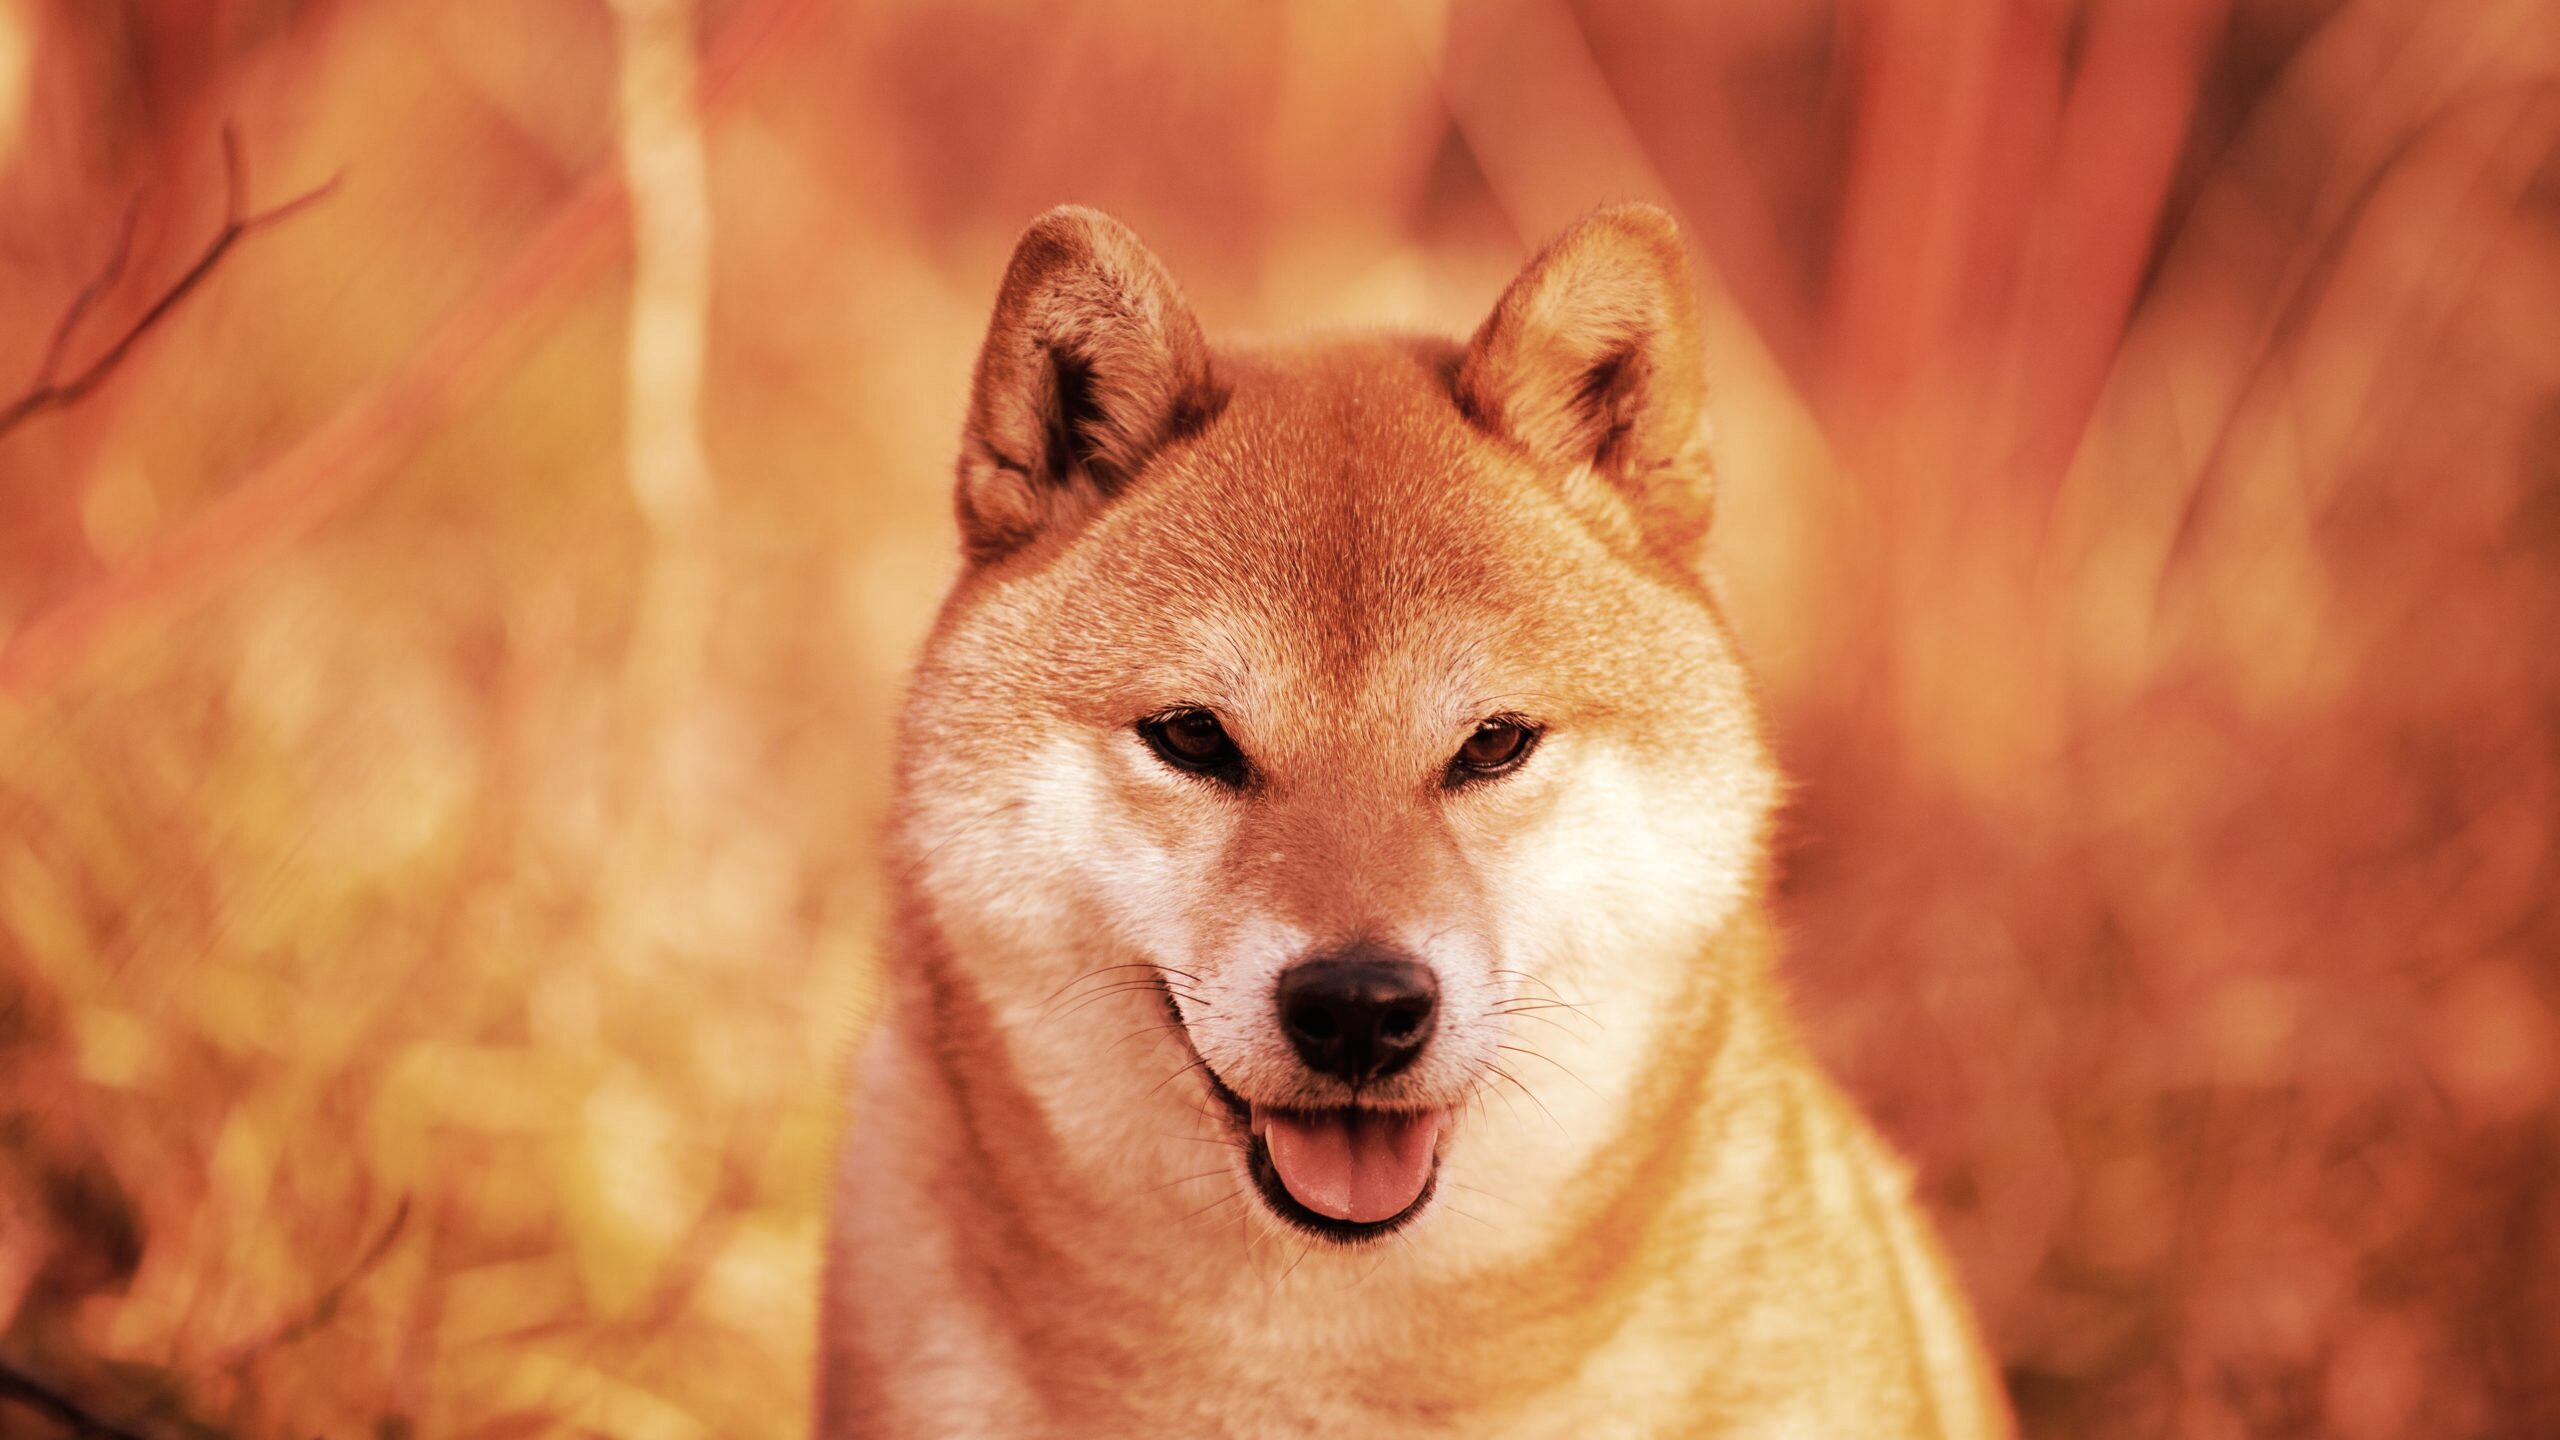 Dogecoin Jumps 8% Overnight, Continuing Two-Week Rally